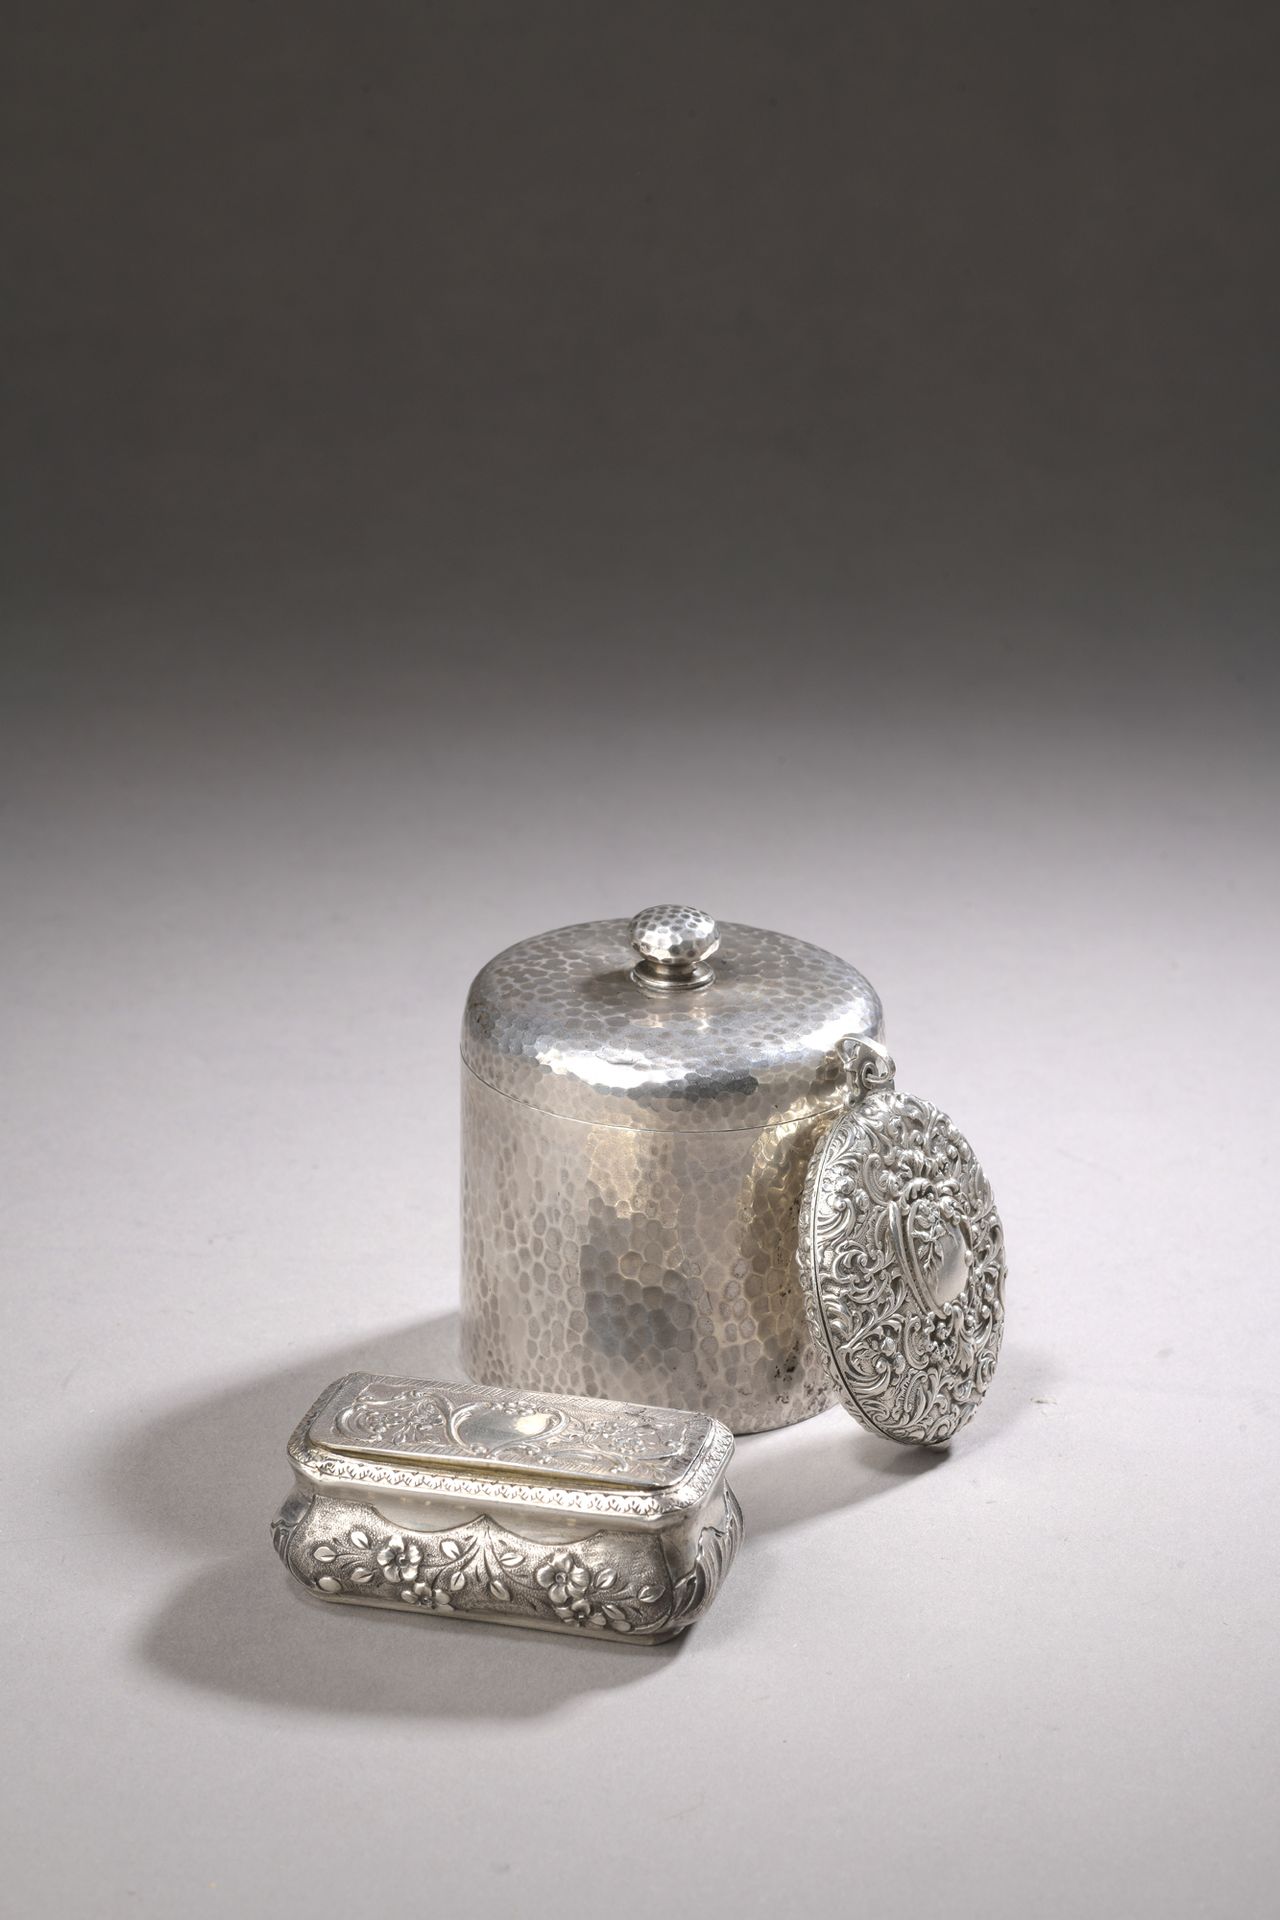 Null Silver tea box 2nd title 800‰, of cylindrical form, hammered. Attached is a&hellip;